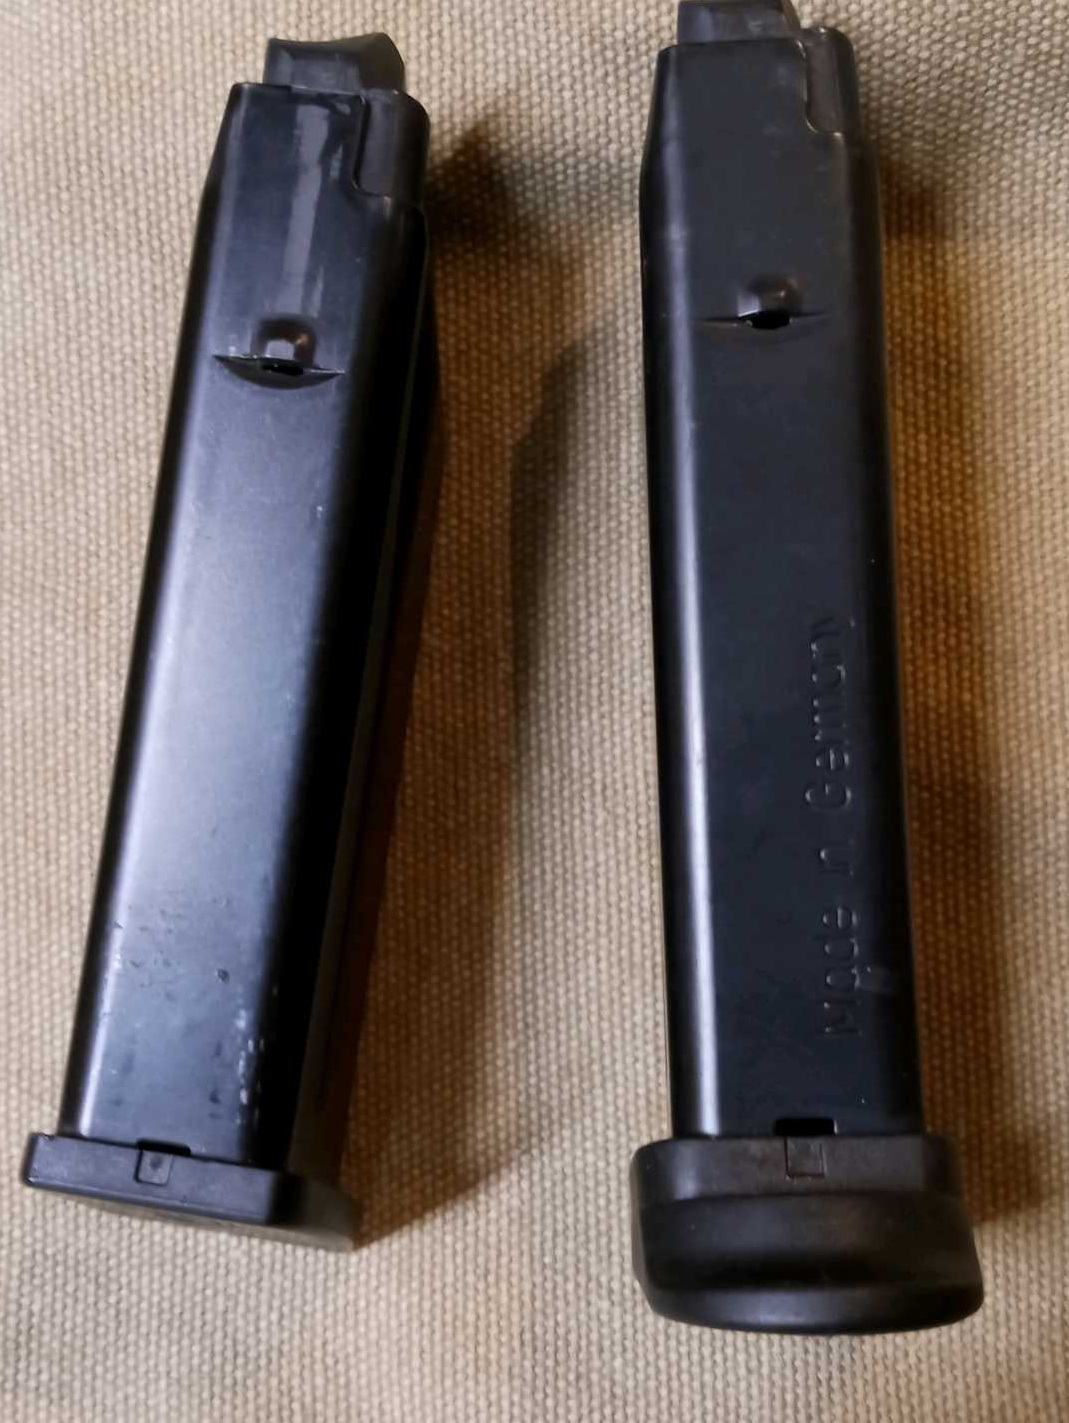 WTS 2 HK USPc 45/HK45c mags - SASS Wire Classifieds - SASS Wire Forum